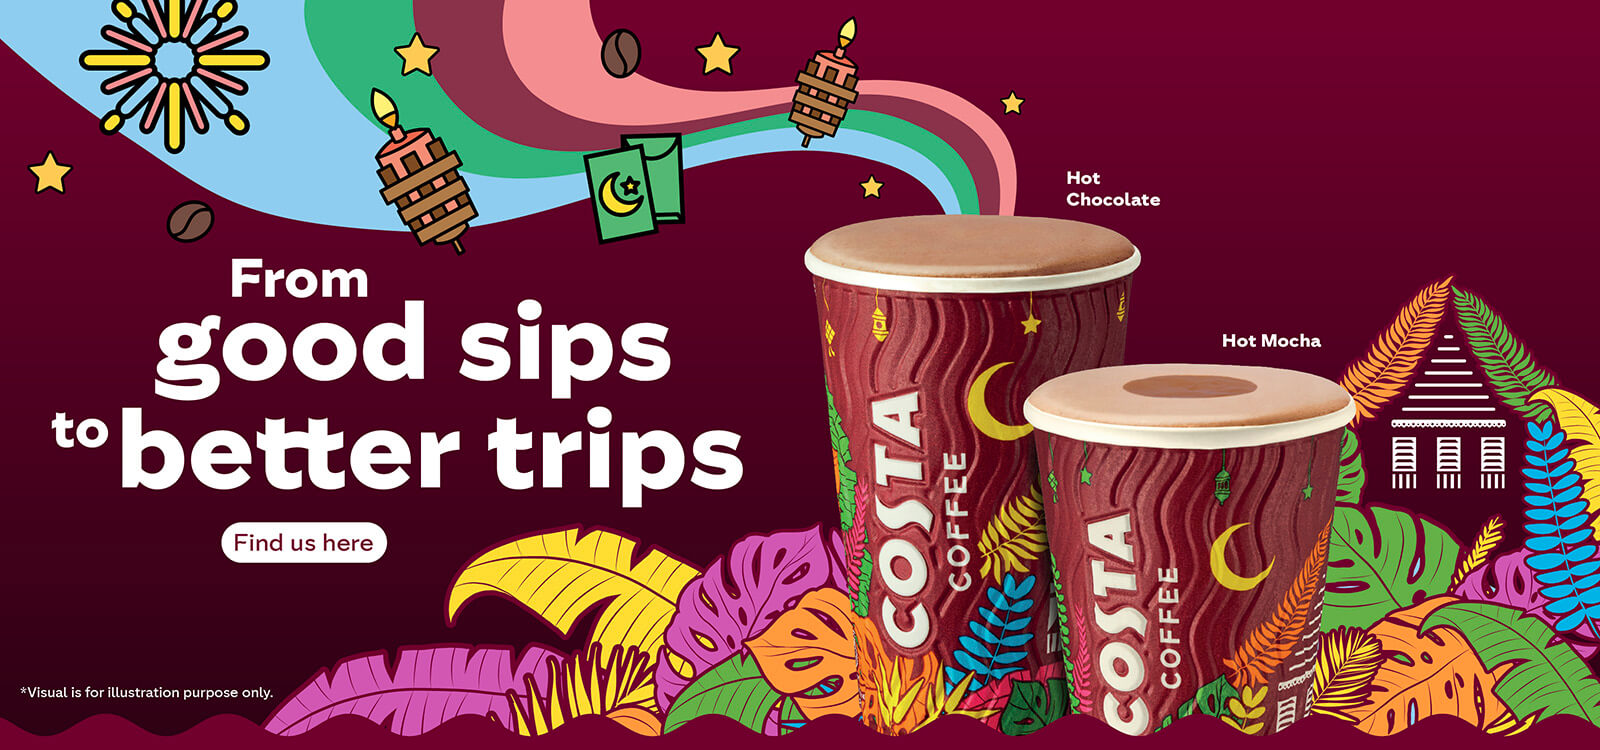 From good sips to better trips